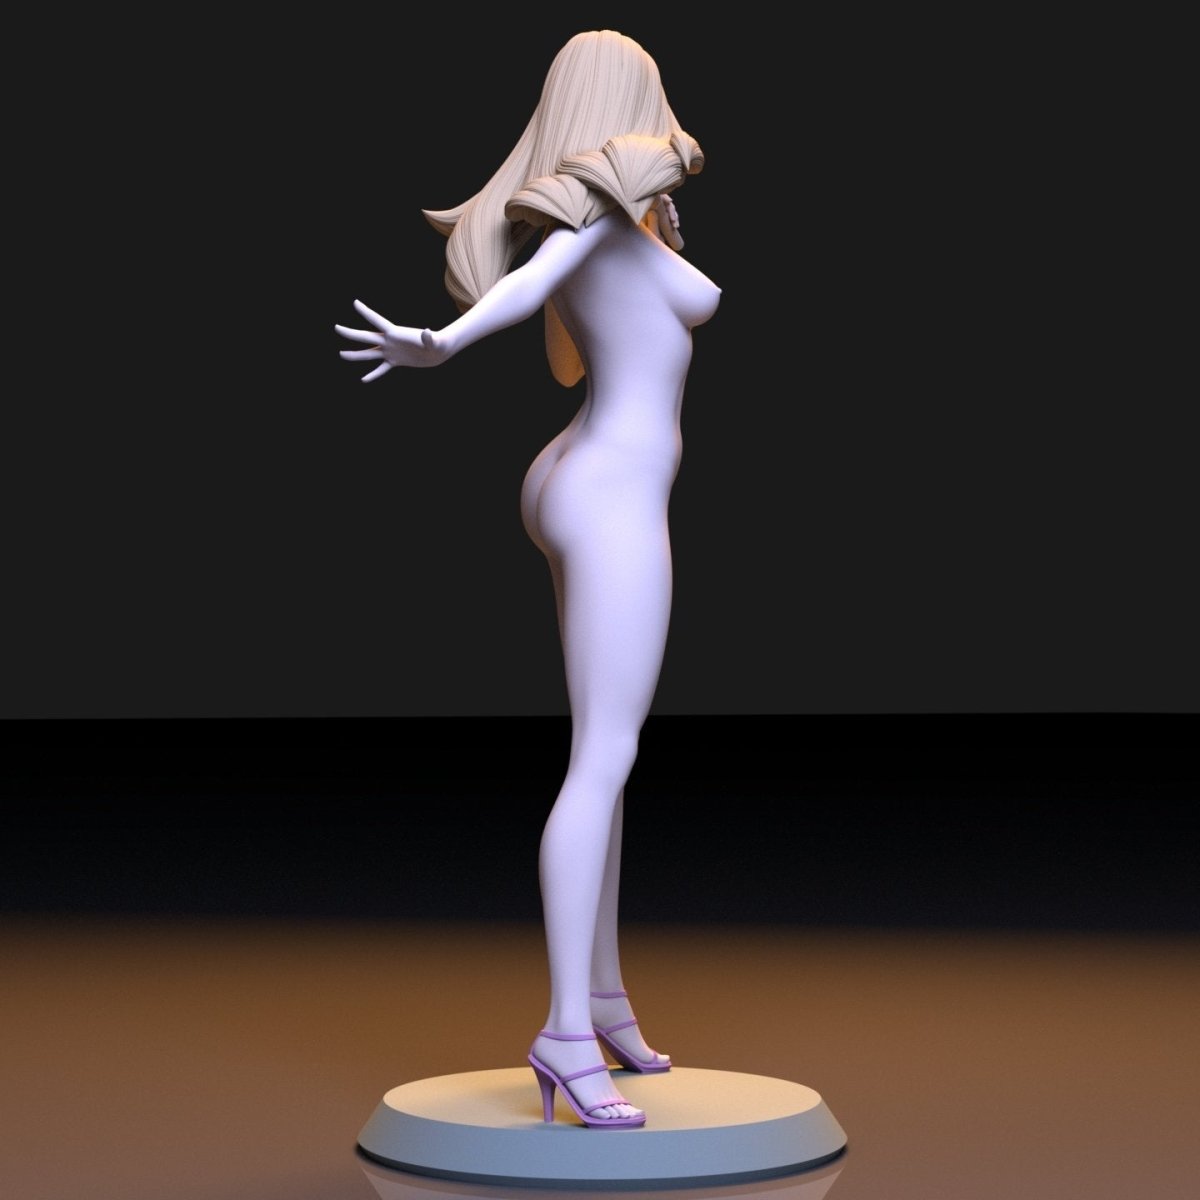 NSFW Resin Miniature Tayl S. NSFW 3D Printed Figurine Fanart Unpainted Miniature Collectibles